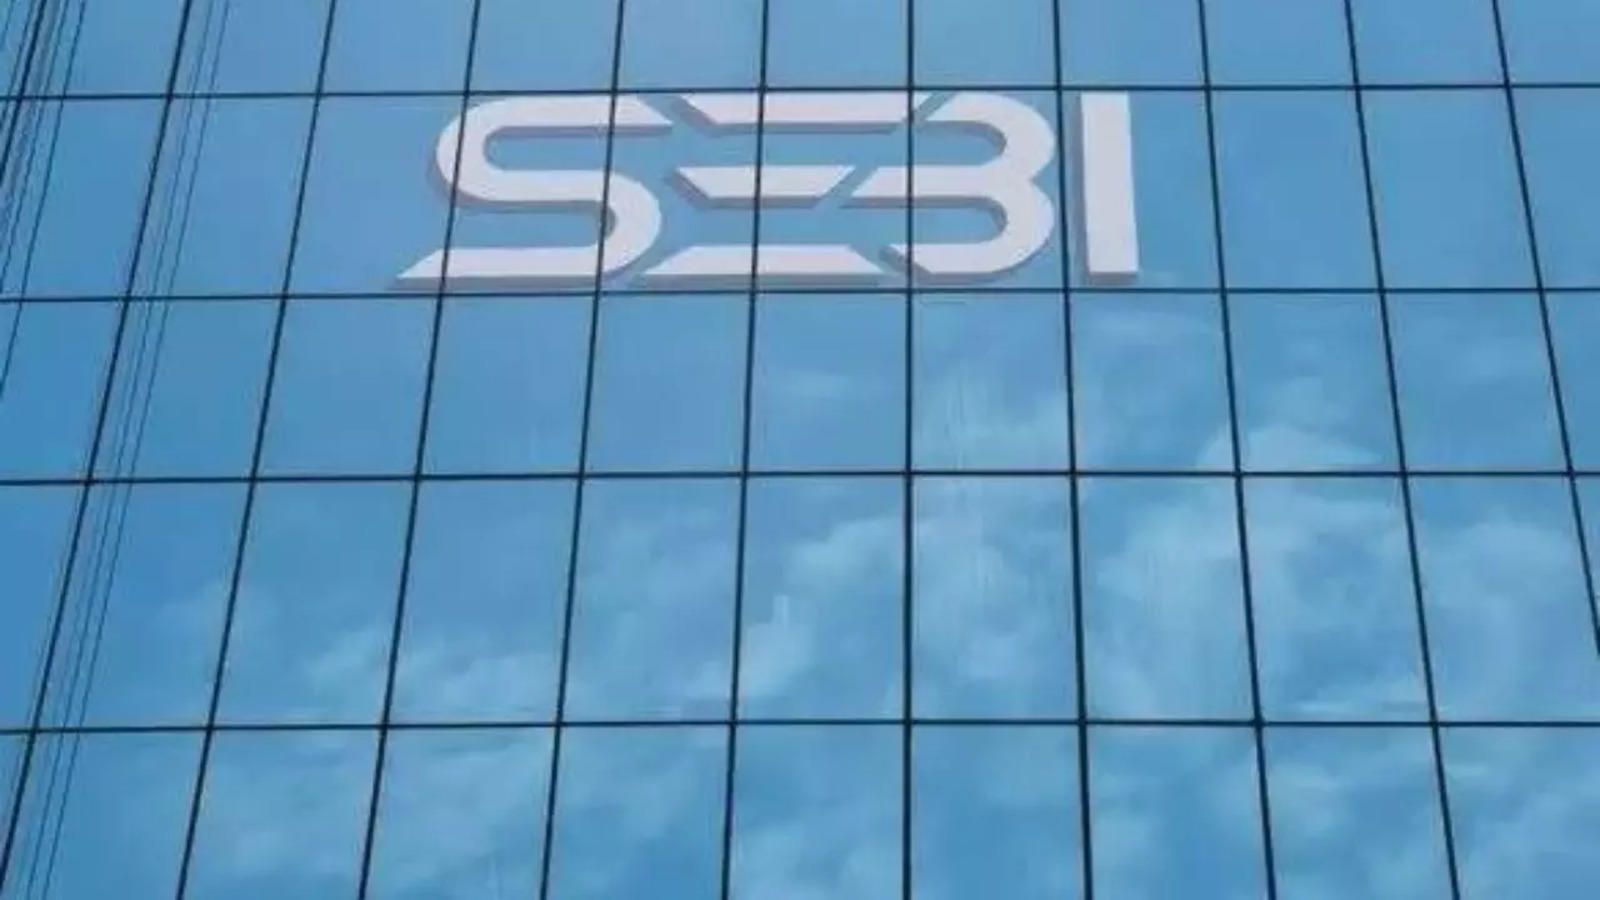 SEBI Proposes Two-Phase Transition to Instant Settlement in Indian Stock Market